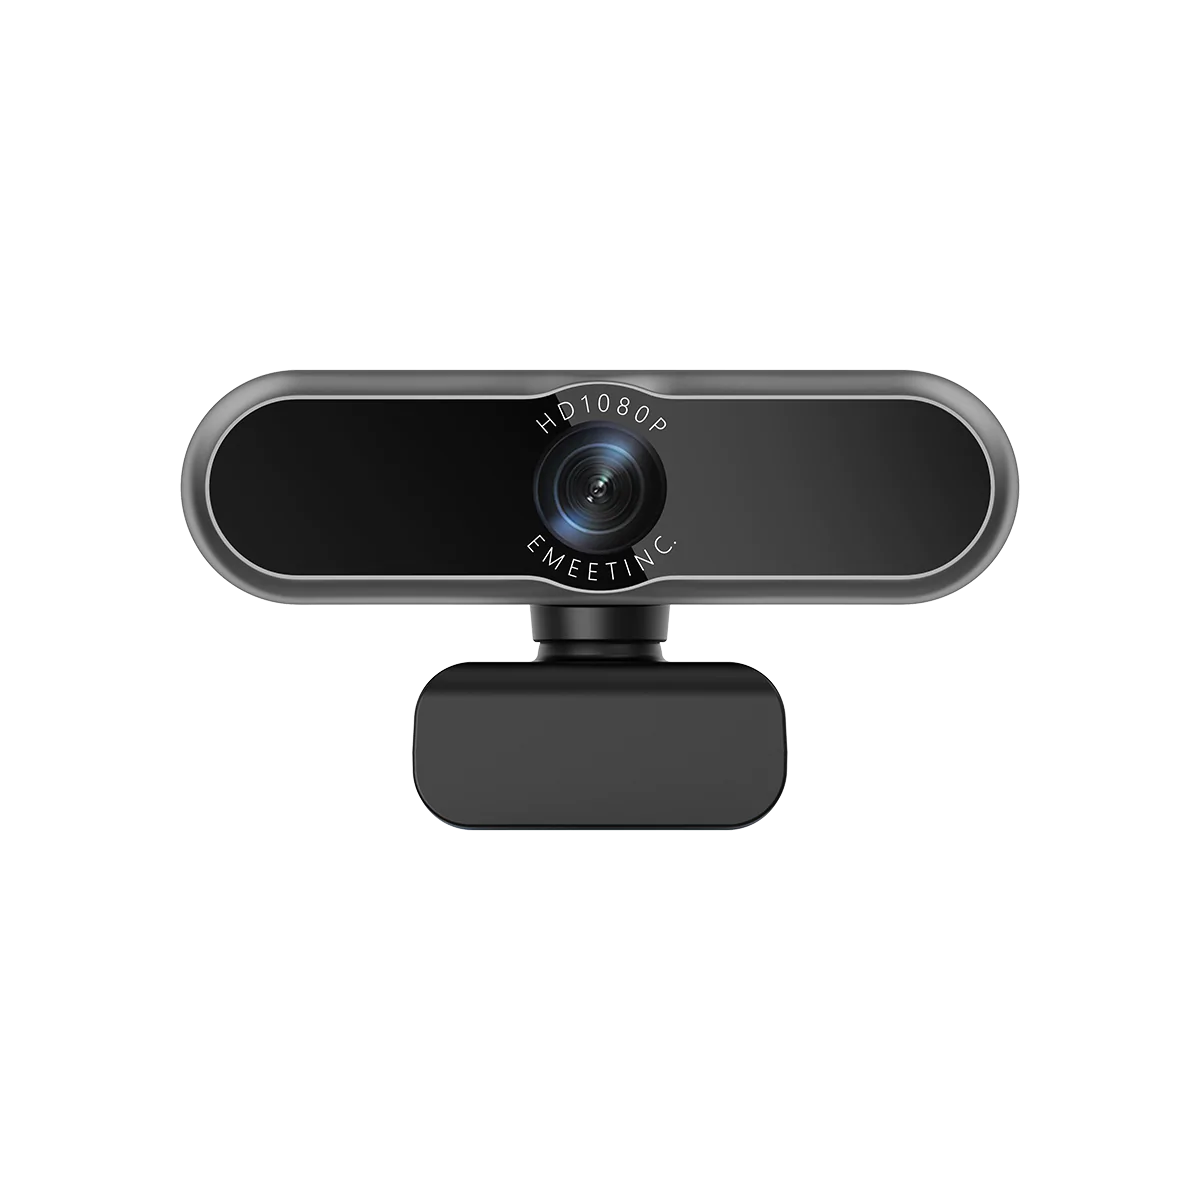 EMEET 3 in 1 Webcam - 1080P Webcam with Microphone and Speakers, Noise  Reduction, Auto Low Light Correction W/Cover, C980 Pro USB Camera Webcam